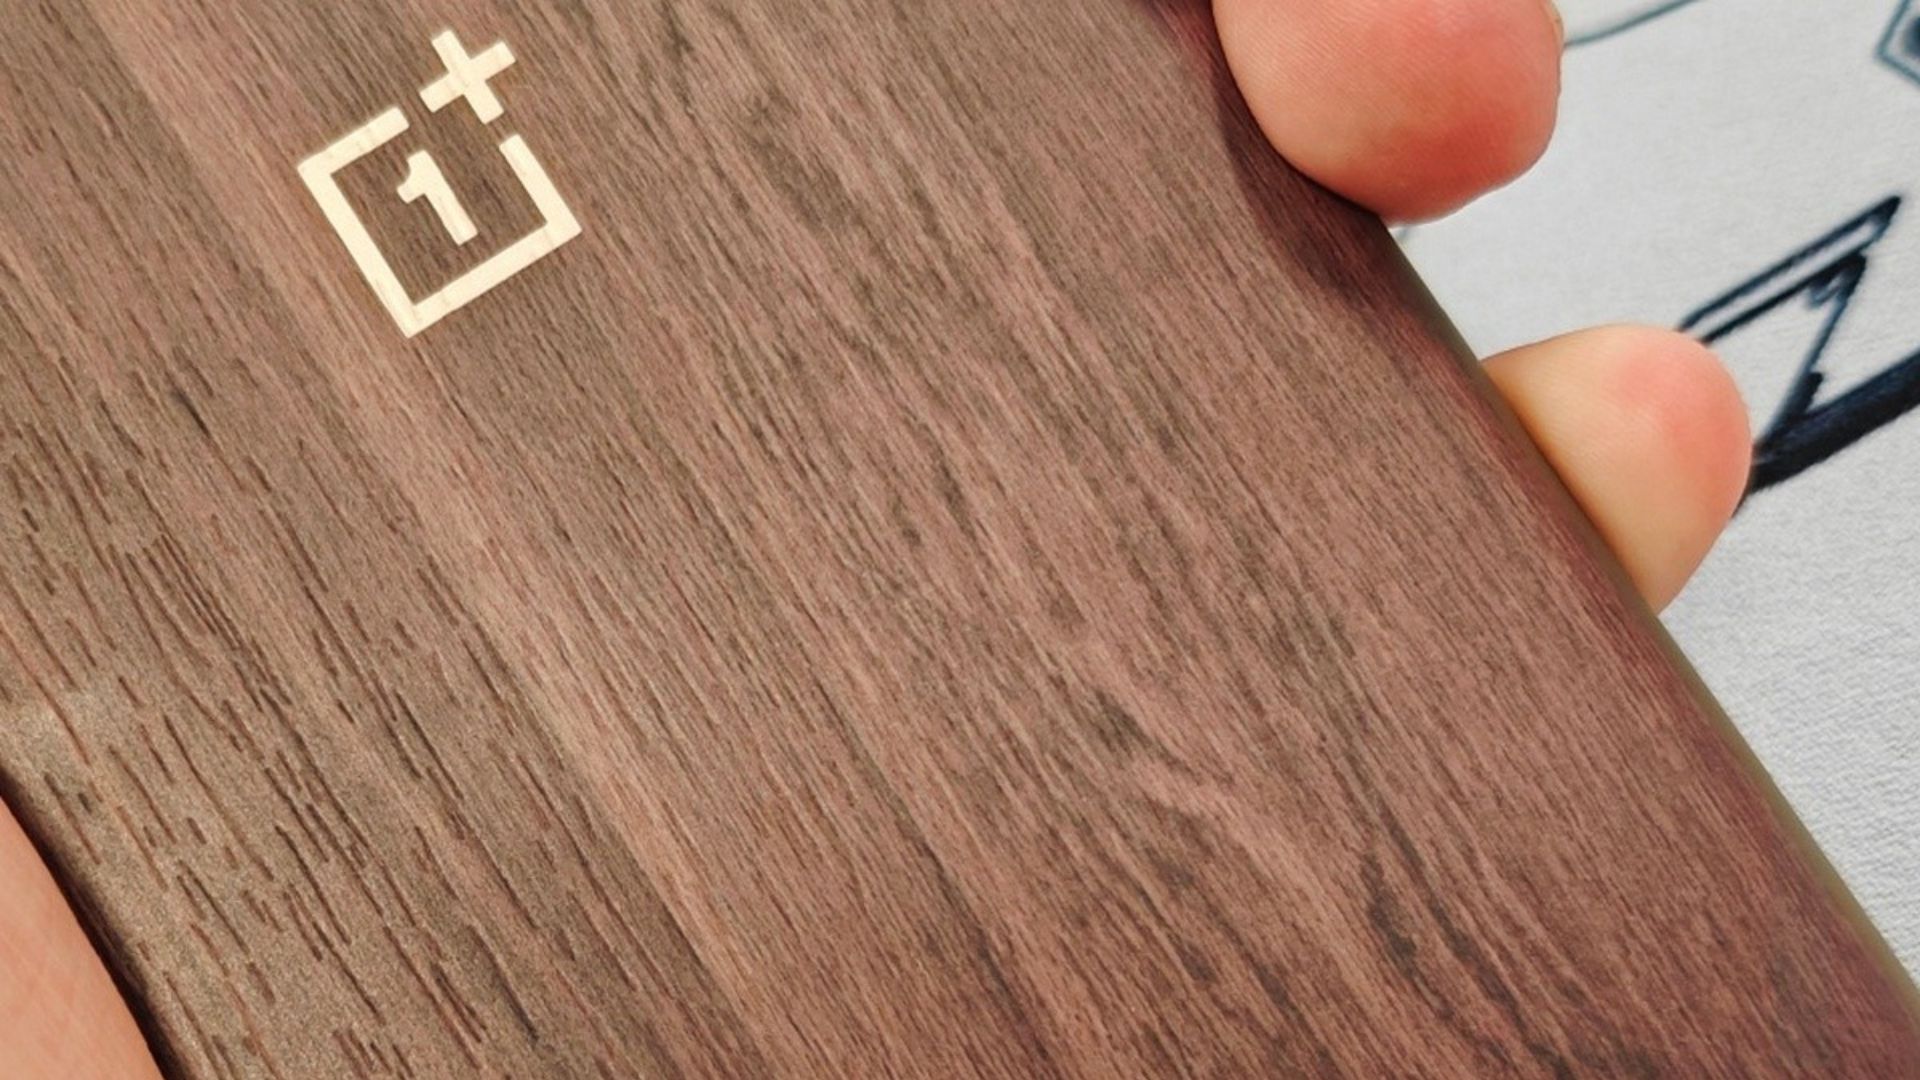 The OnePlus 12 may sport a wood texture back, or at the very least a wood texture casing.